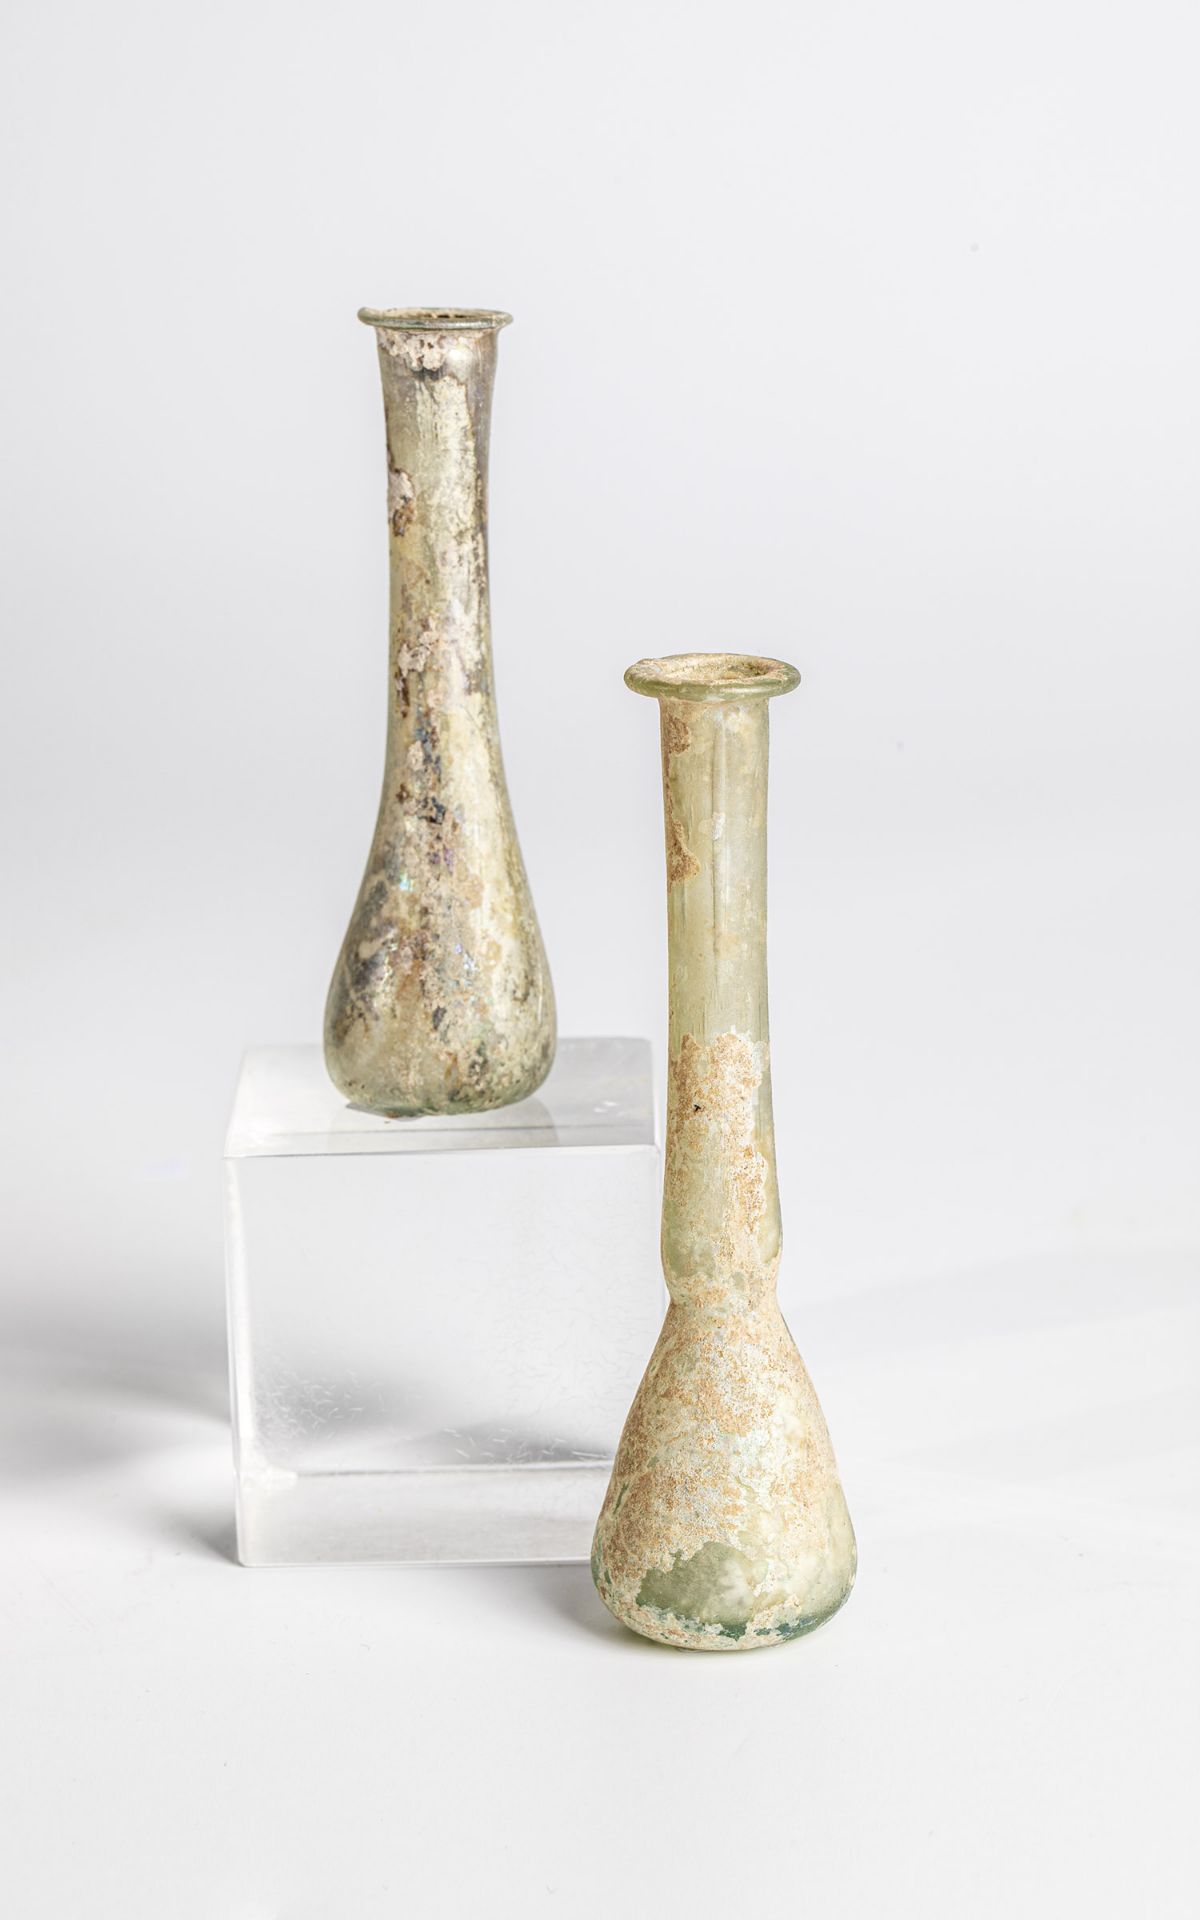 Two vials from the Eastern Mediterranean, 2nd-3rd century. Greenish glass. Mouth protruding. H. 9.